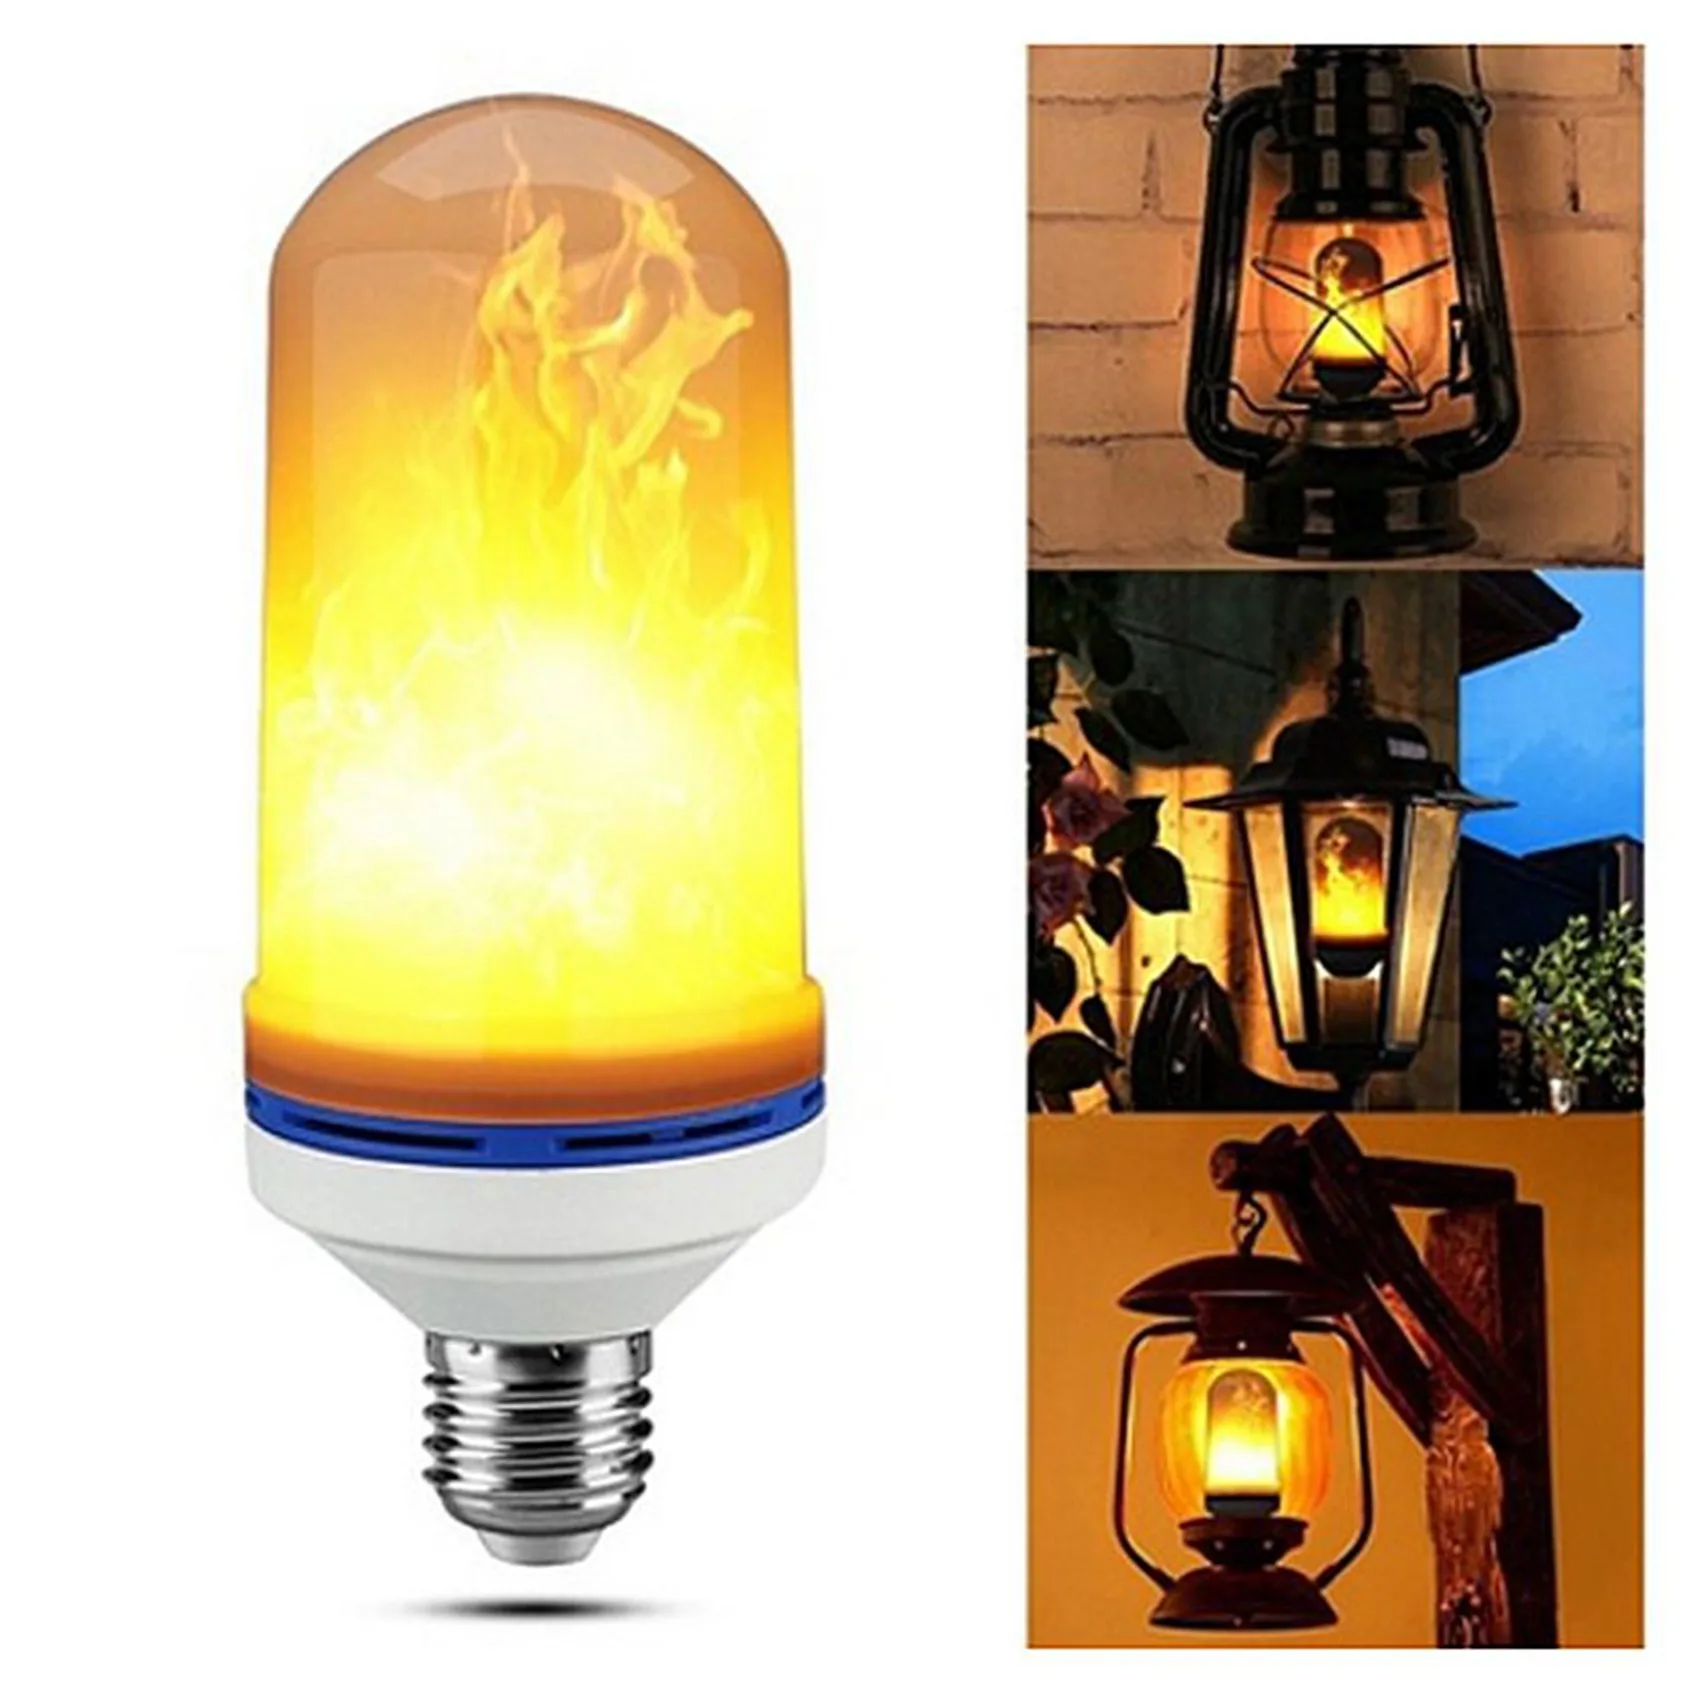 

2X LED Flame Light Bulbs Fire Flicker Effect Lamp LED Bulb with Flickering 5W Flame Decorations LED Lights E27